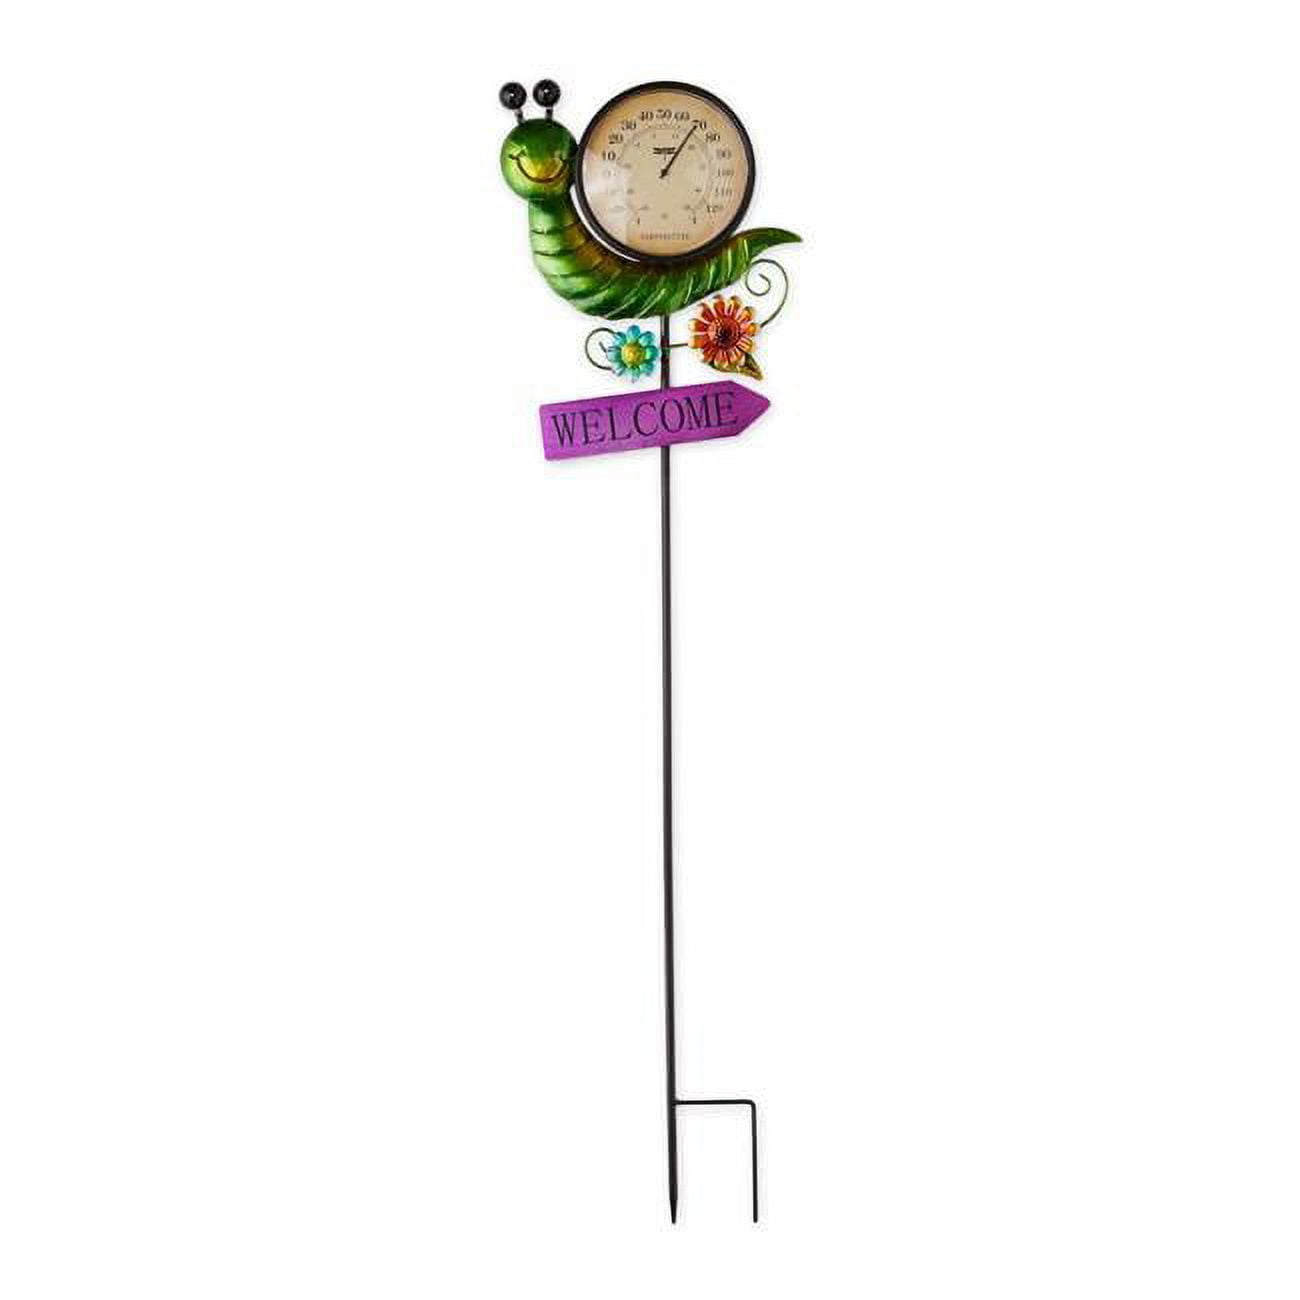 BOOK PUBLISHING COMPANY Metal Thermometer Garden Stake - Snail